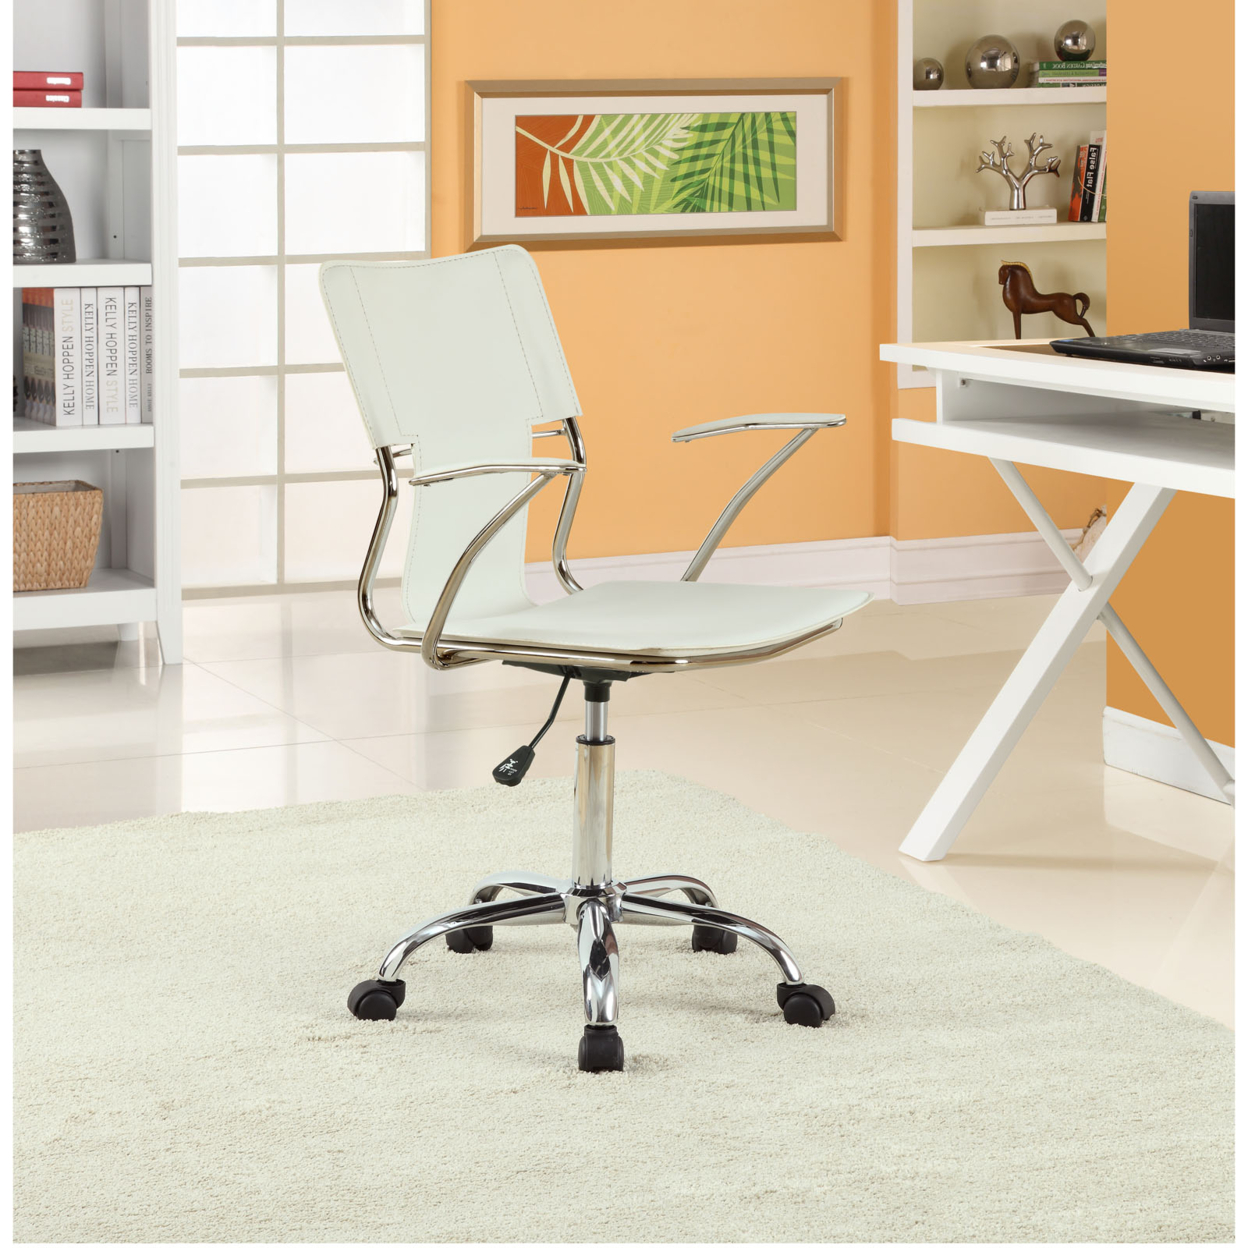 White Studio Office Chair - image 2 of 5